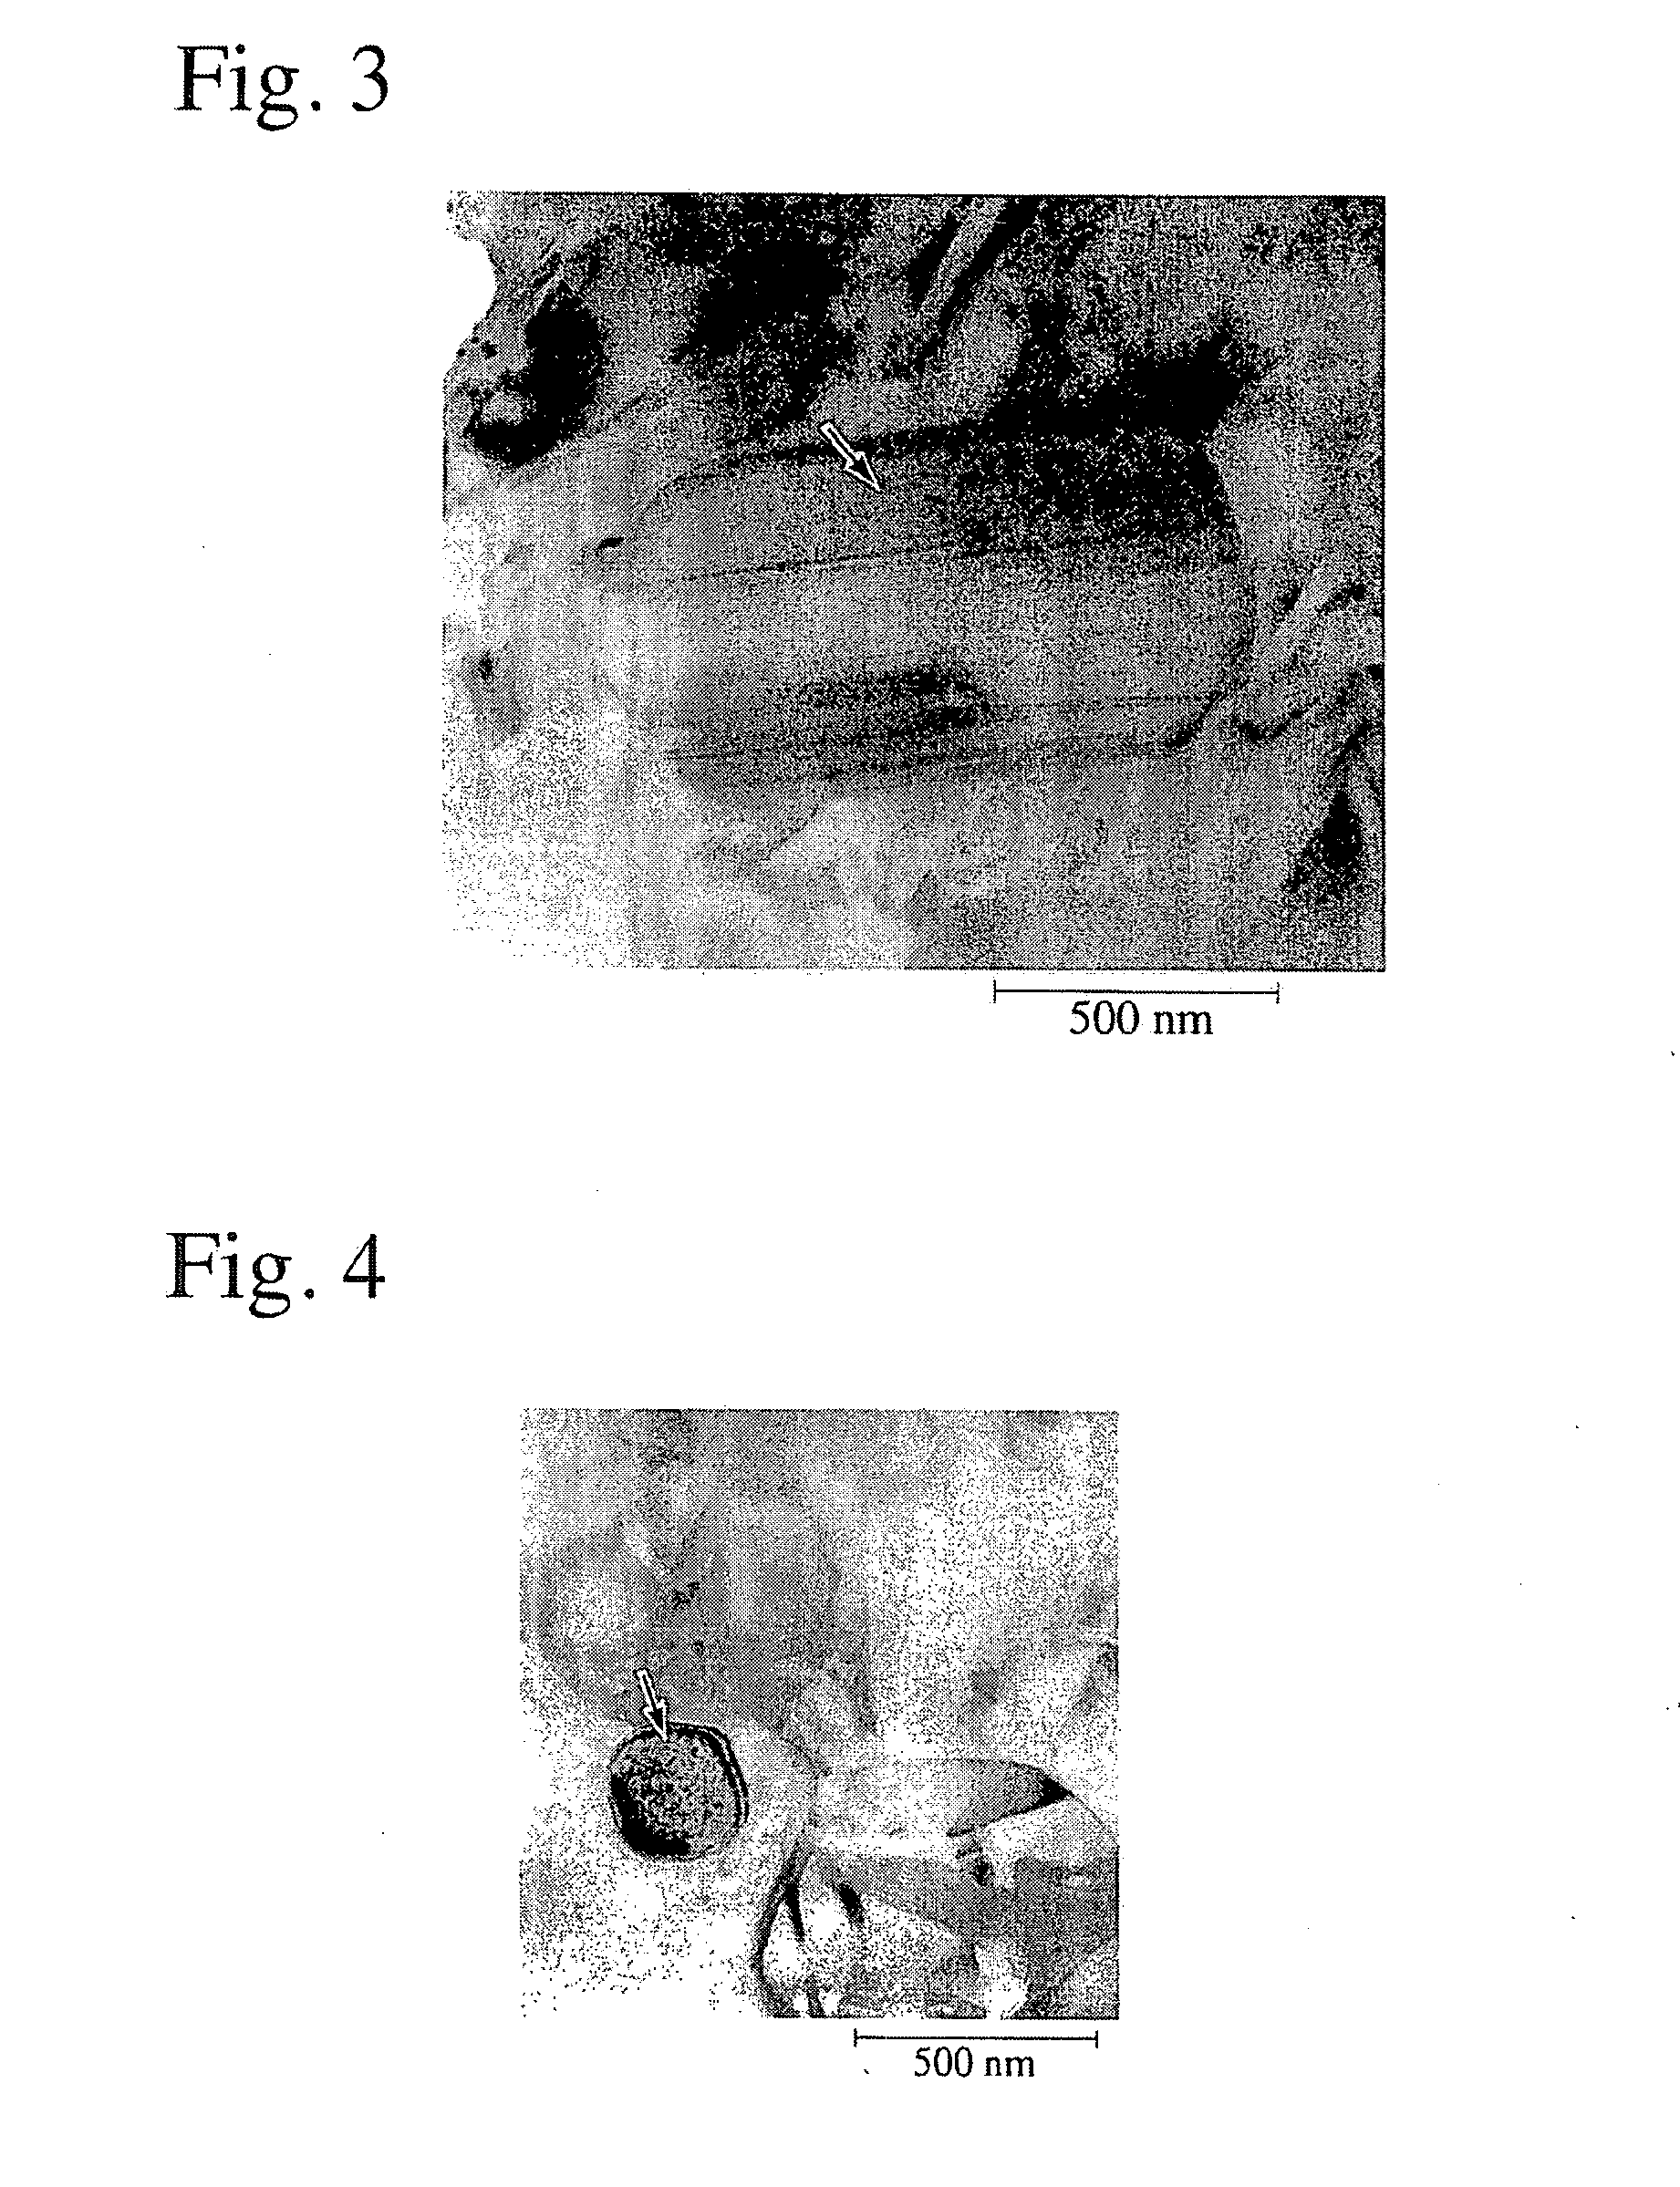 Ceramic honeycomb structure and moldable material usable for its extrusion molding